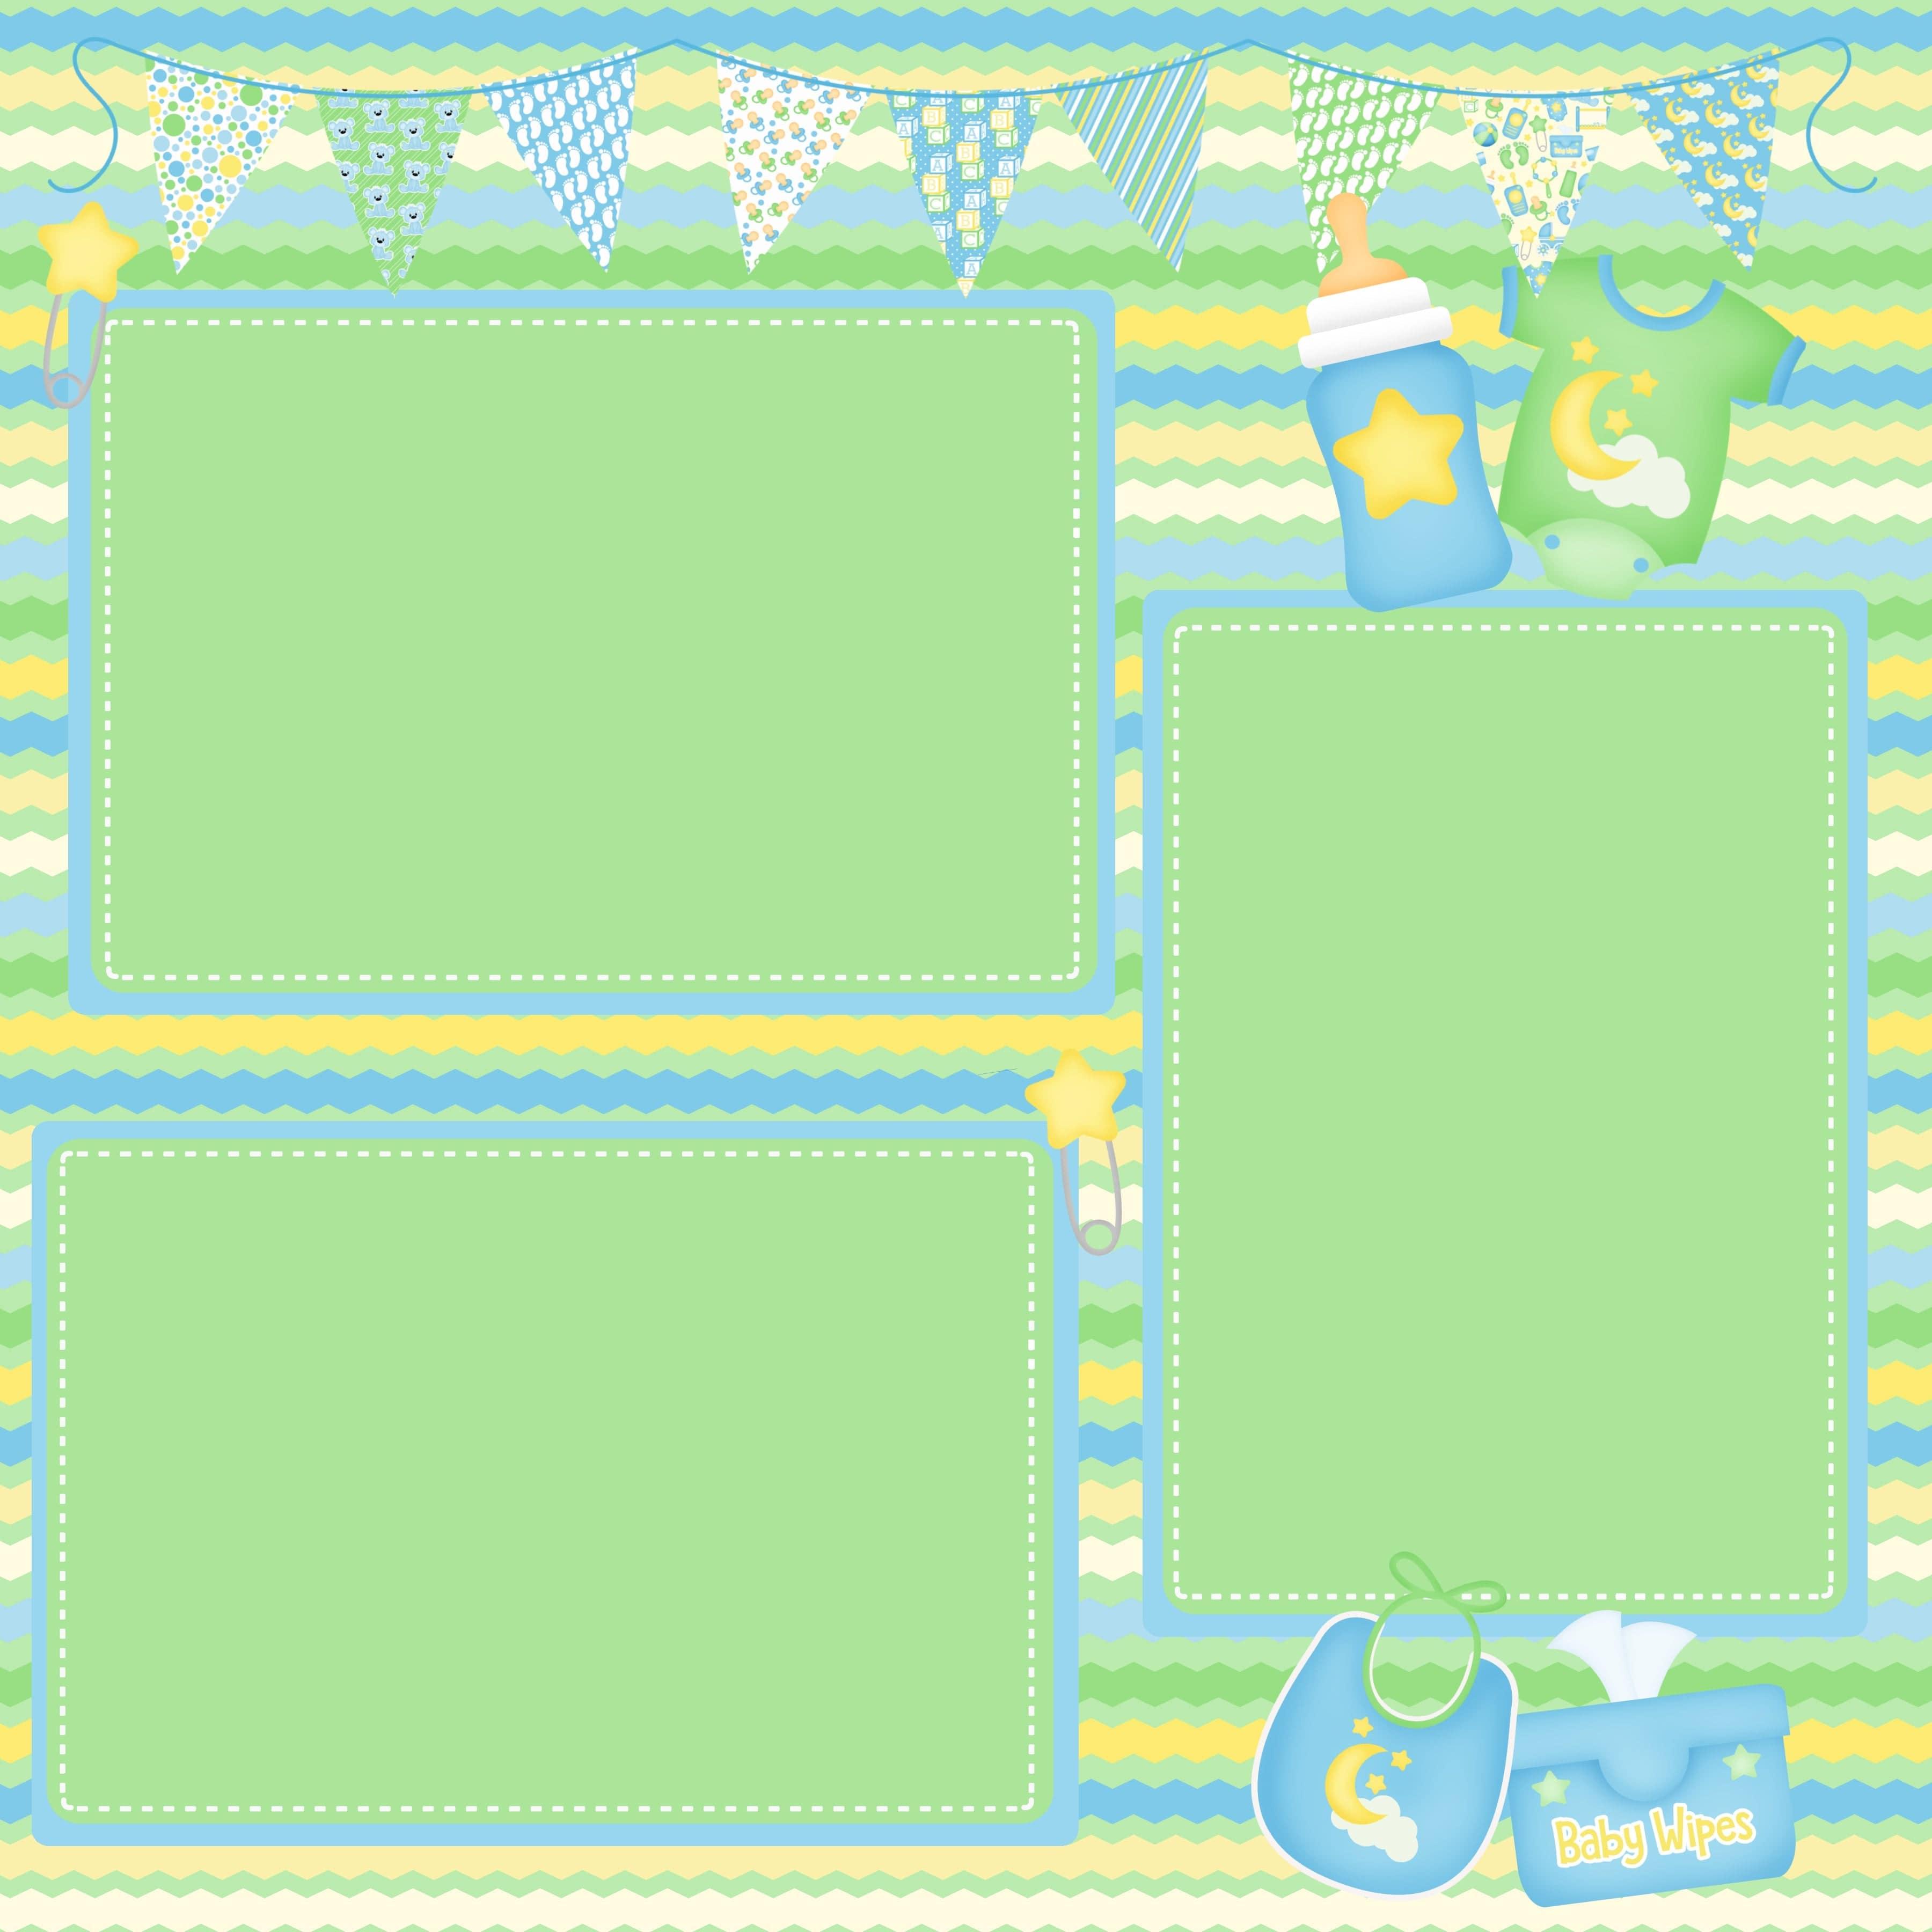 It's A Boy Collection **Custom** Baby Boy (2) - 12 x 12 Premade, Printed Scrapbook Pages by SSC Designs - Scrapbook Supply Companies